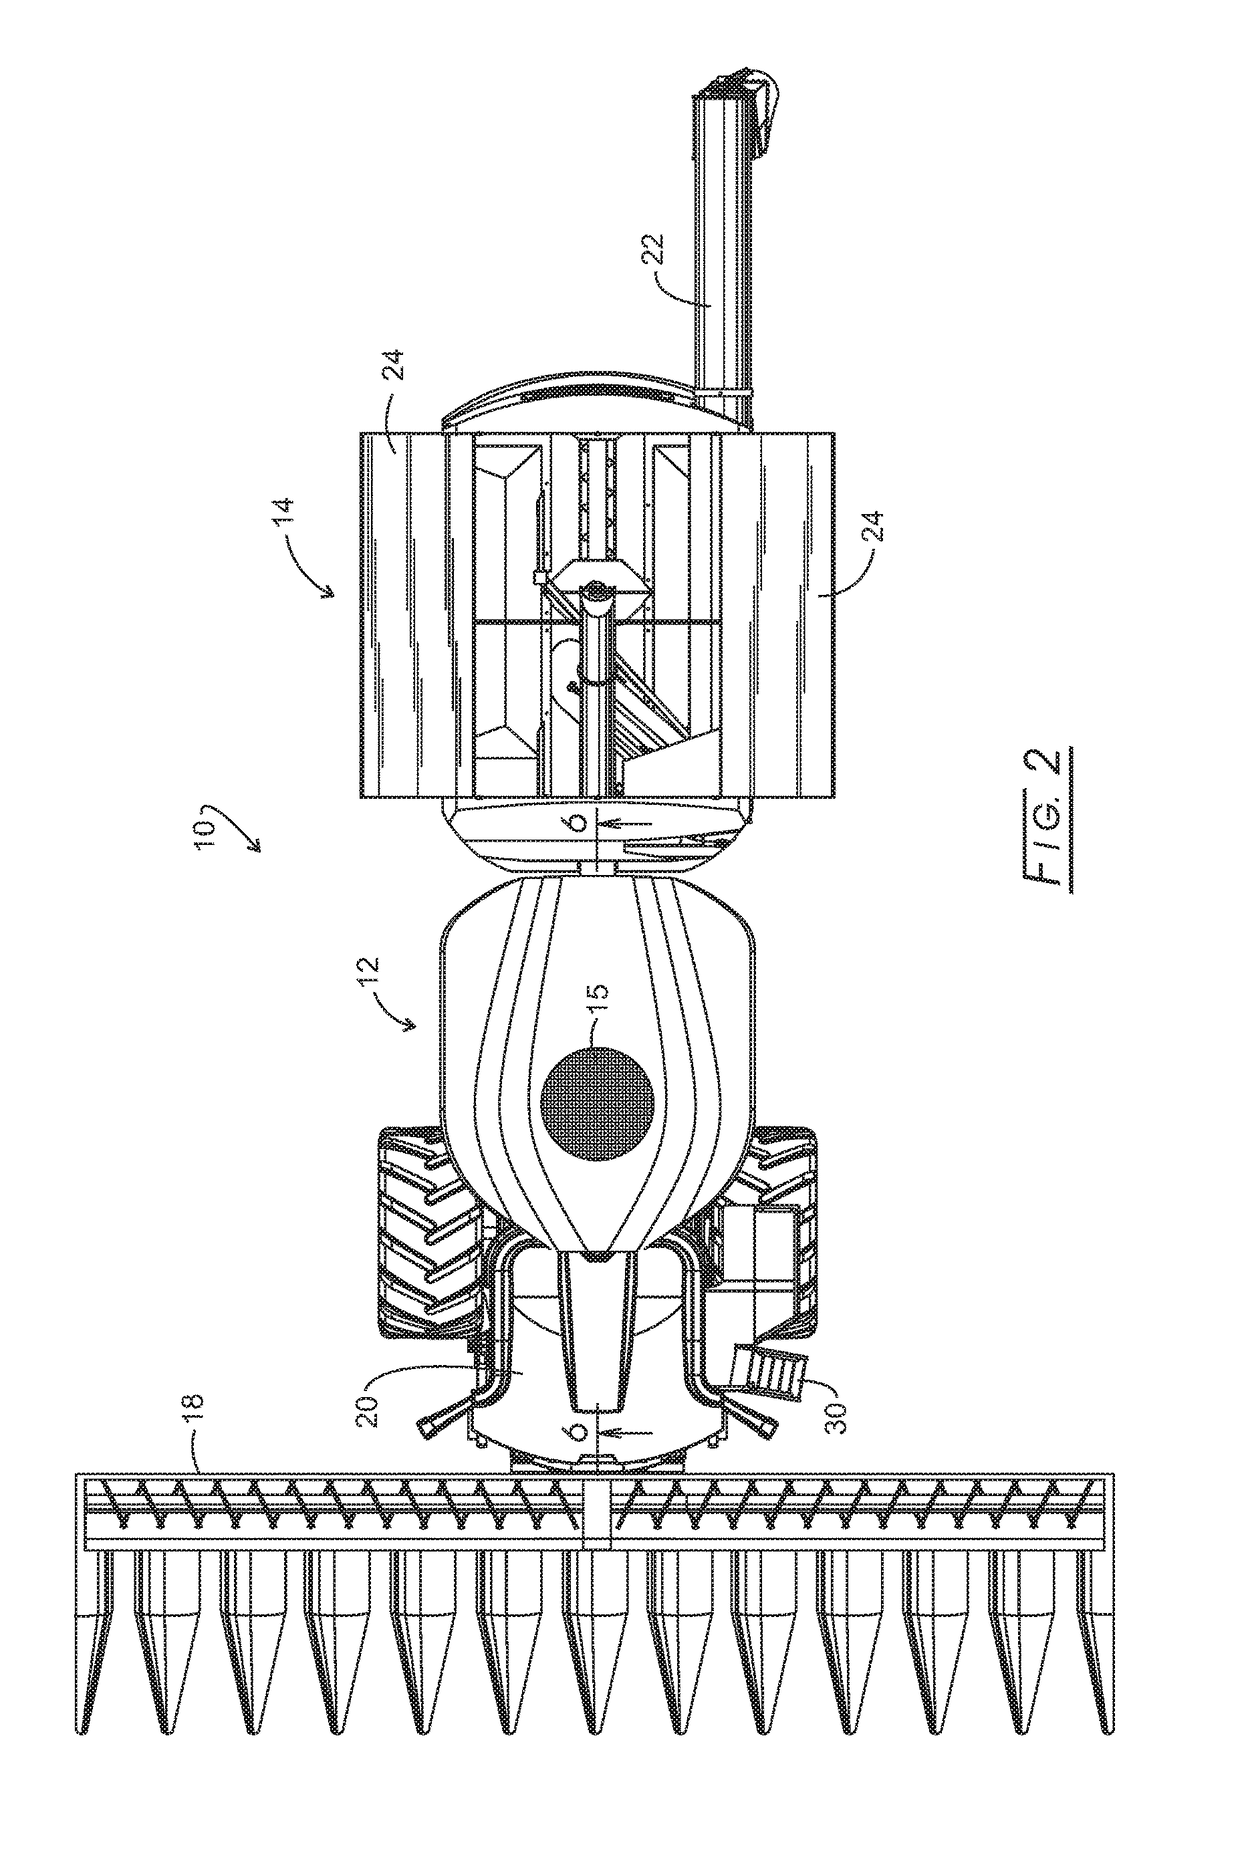 Three-section concave and adjustment mechanism for an agricultural harvesting combine